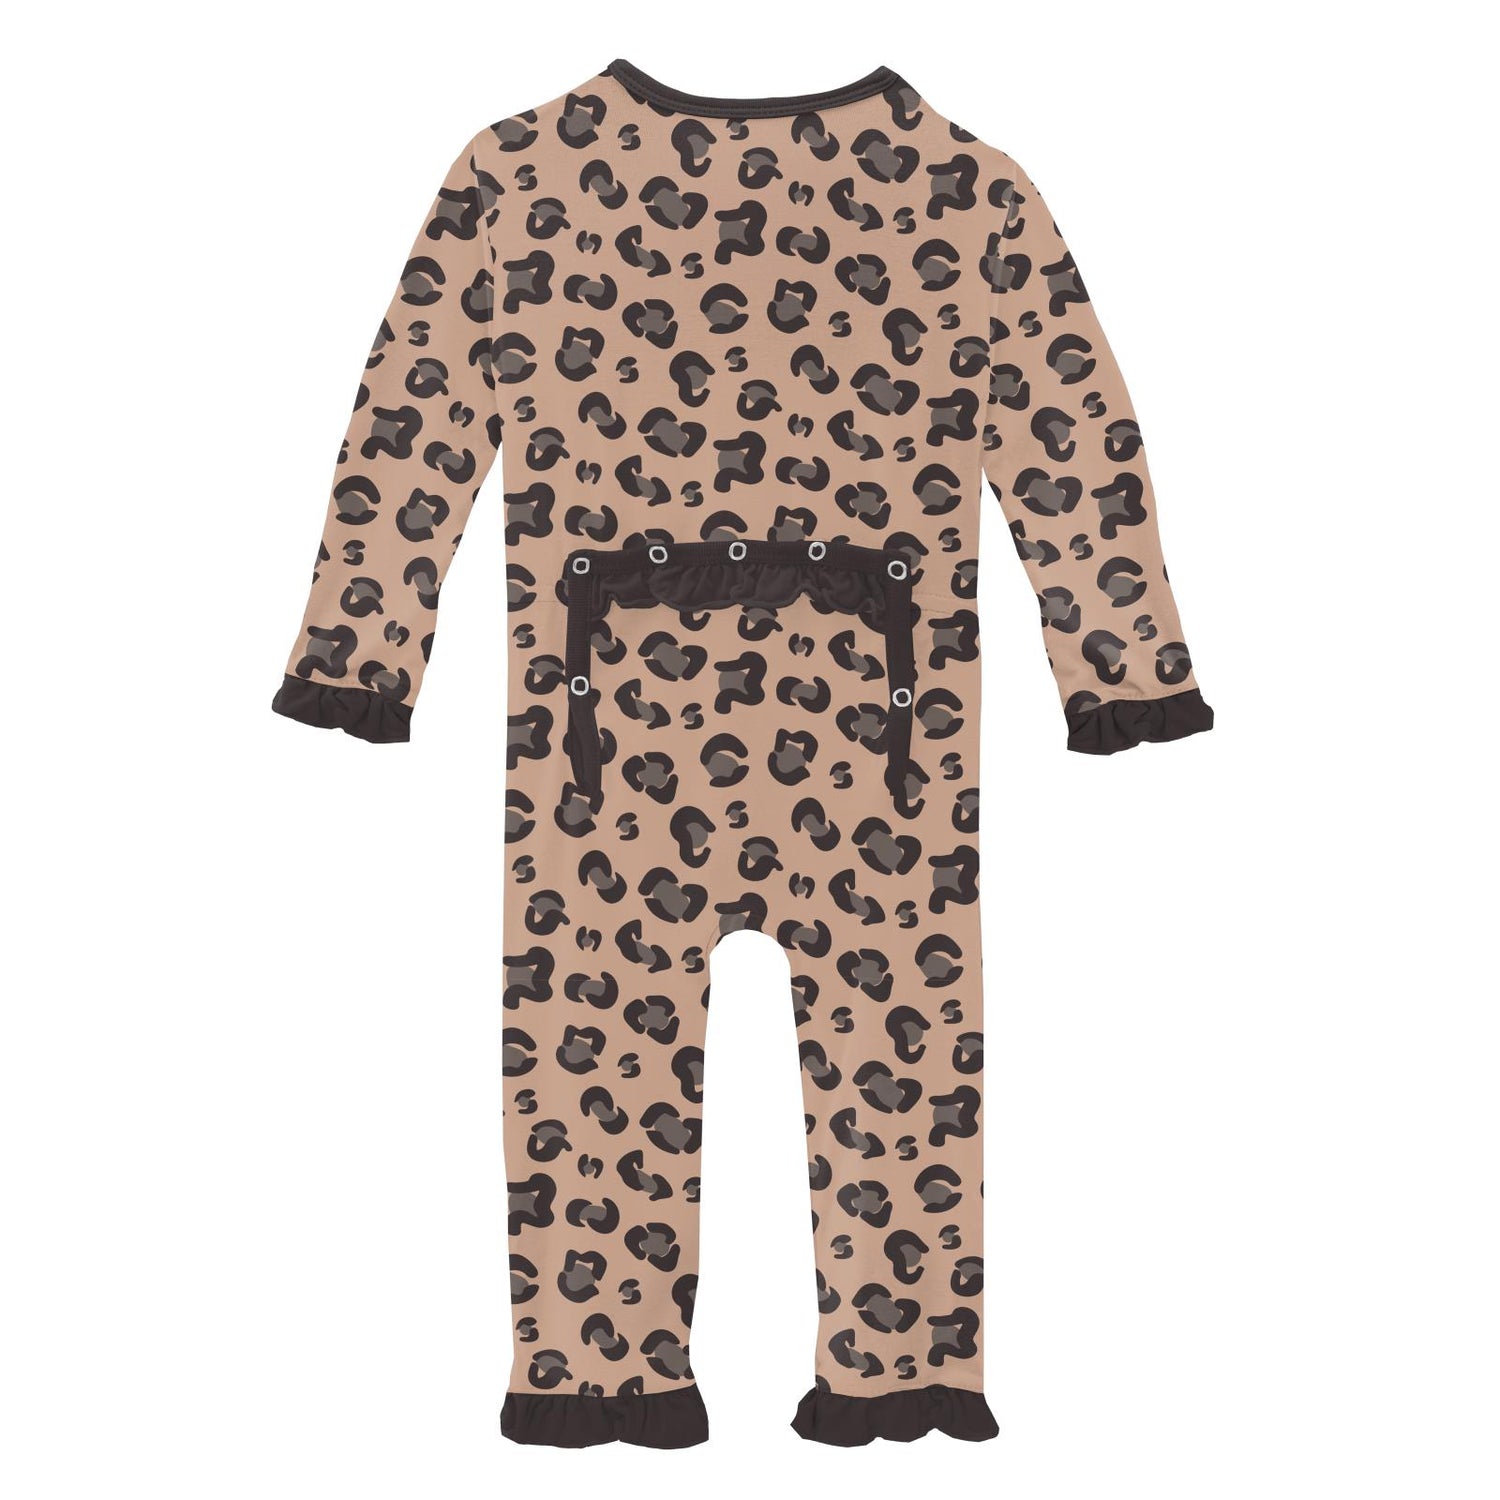 Print Classic Ruffle Coverall with Snaps in Suede Cheetah Print